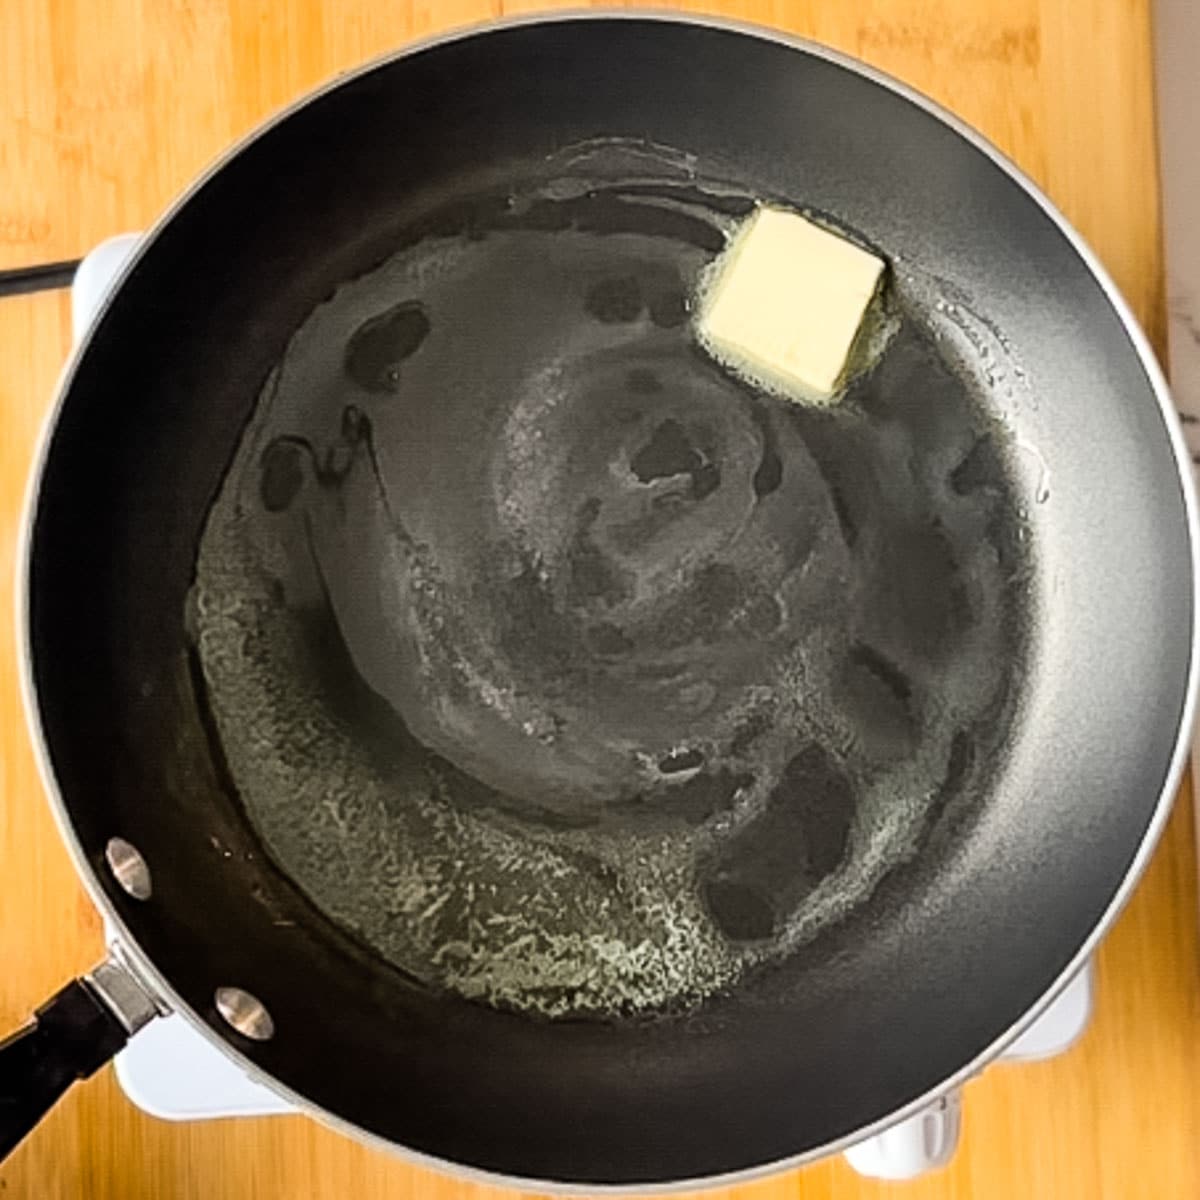 butter melted in frying pan.